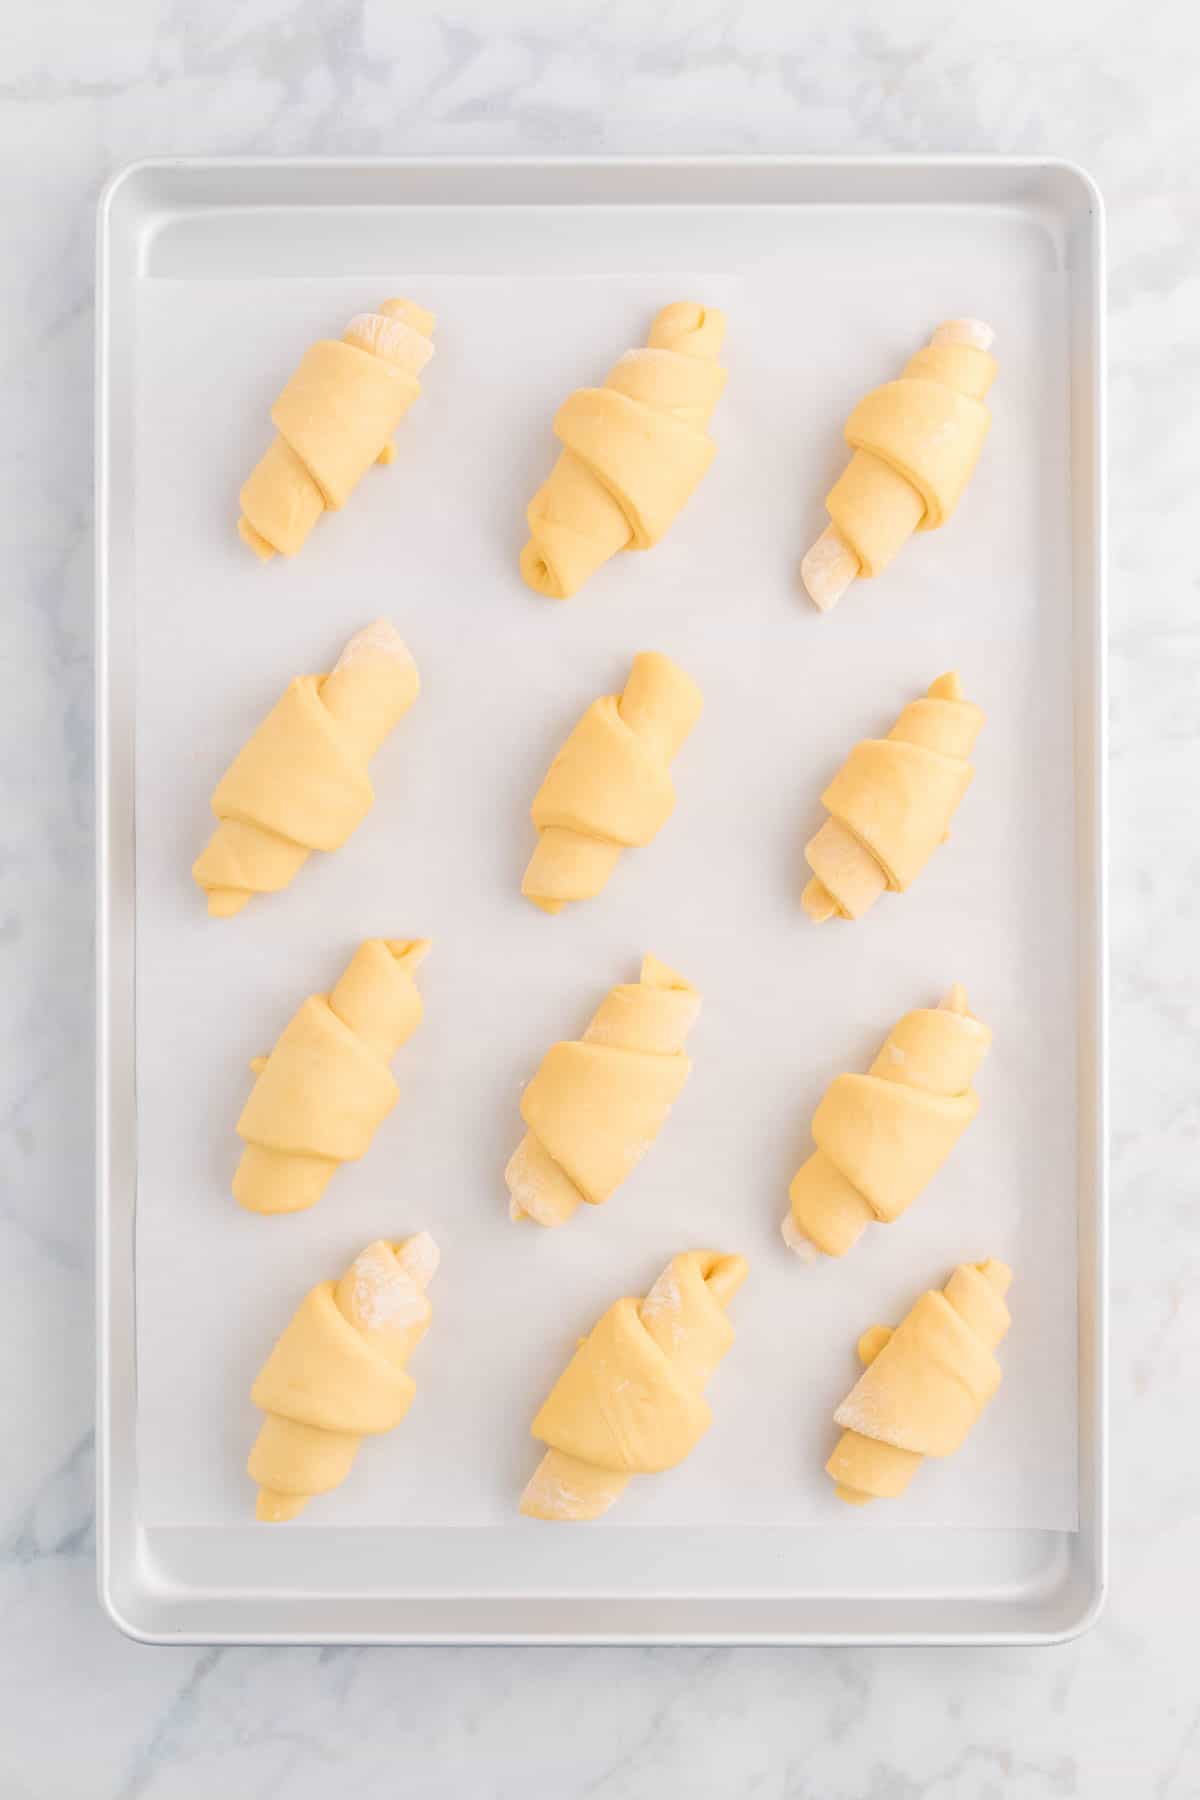 Top view of uncooked crescent rolls on a baking sheet. 